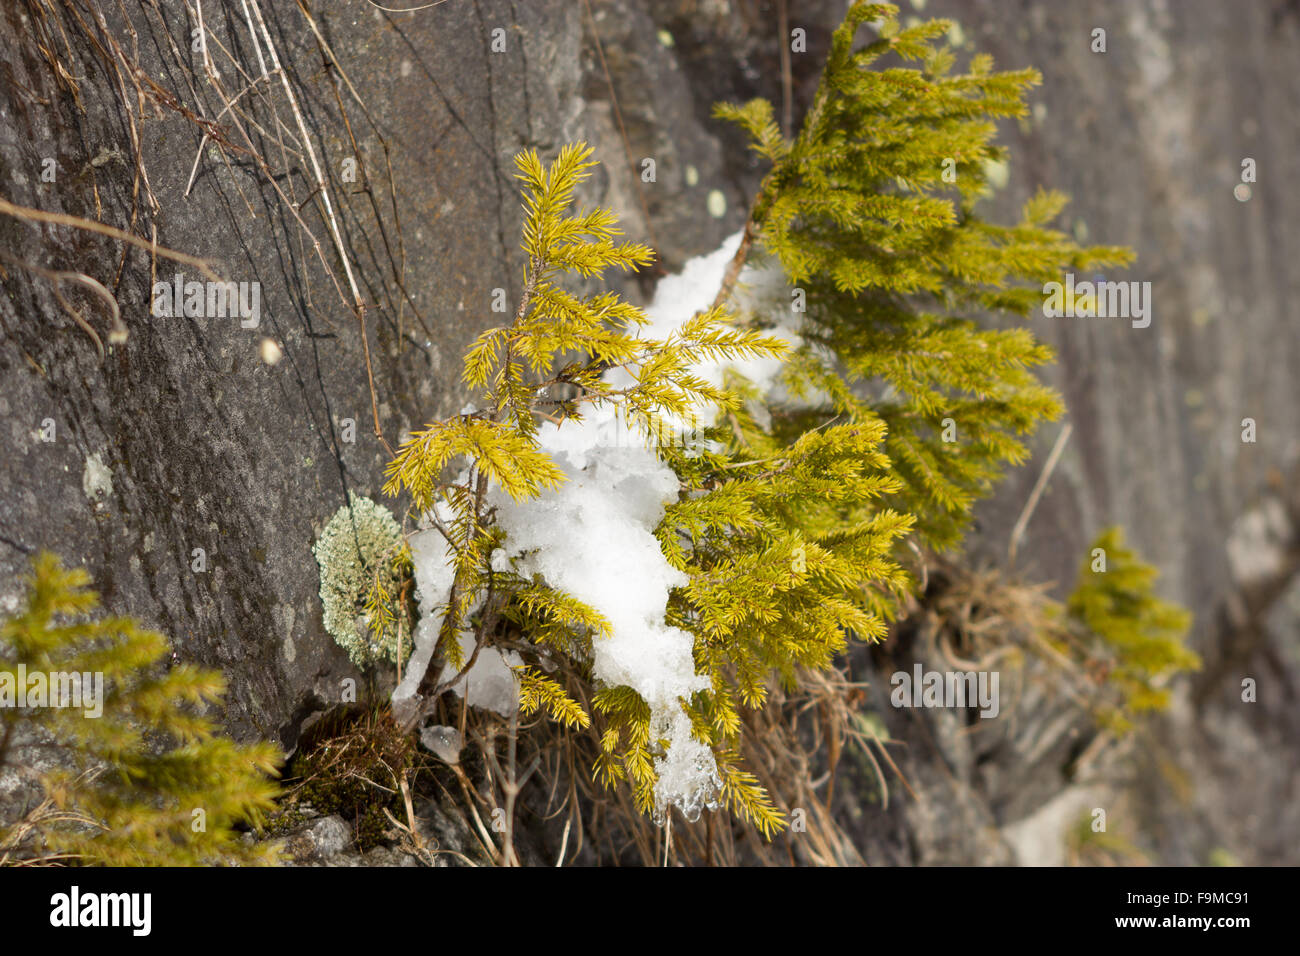 Small trees and colorful moss grow on coastal rock,melting snow. spring season in austria alps. Stock Photo